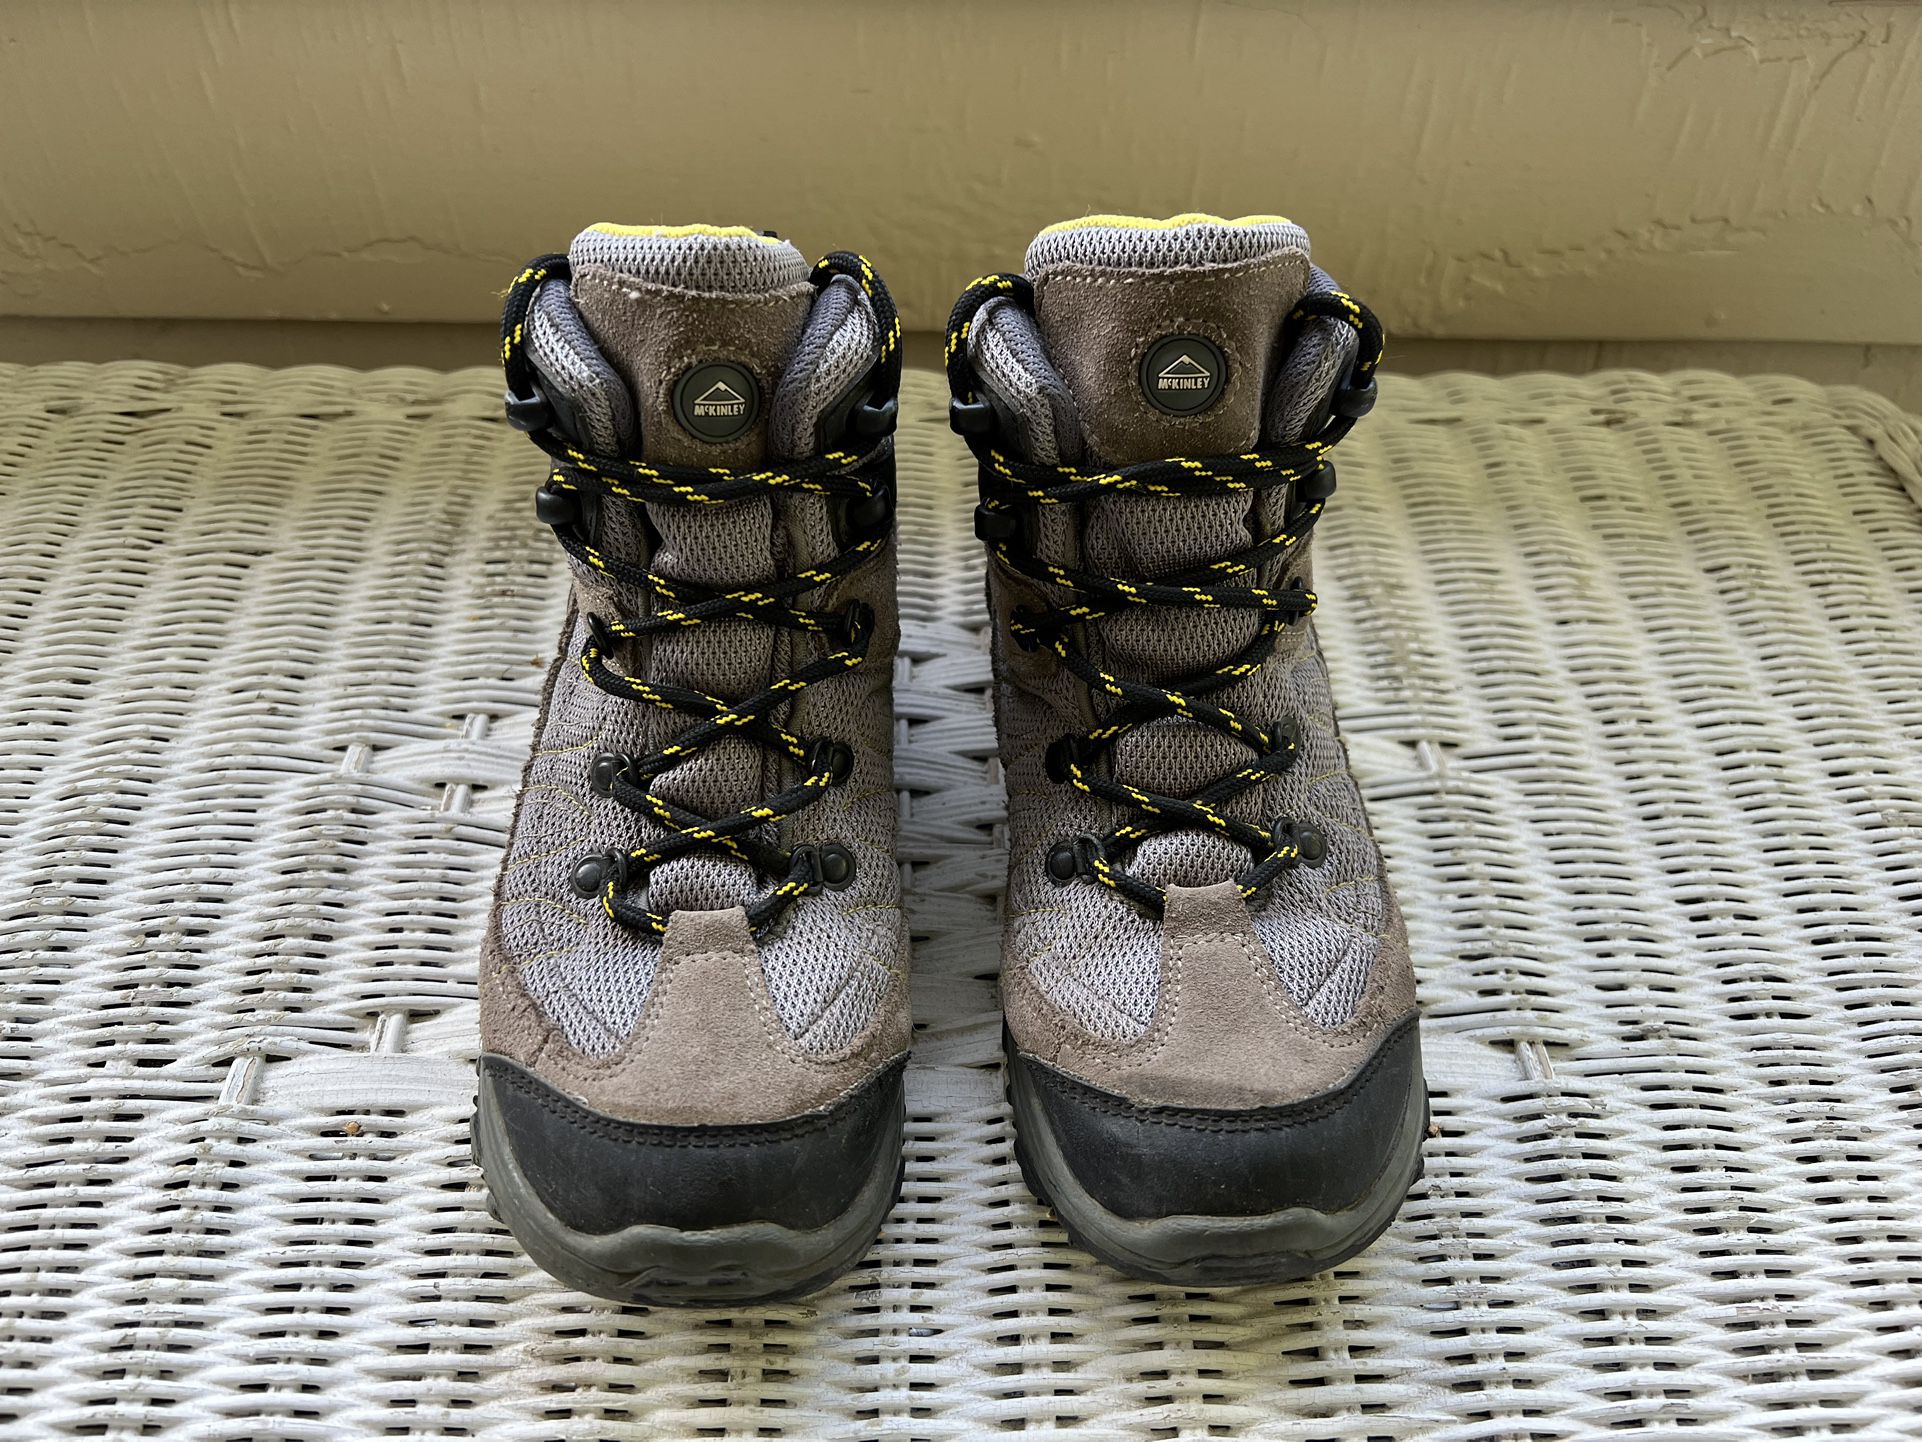 Gently Used McKinley Junior Hiking Boots Aquamax Size 2